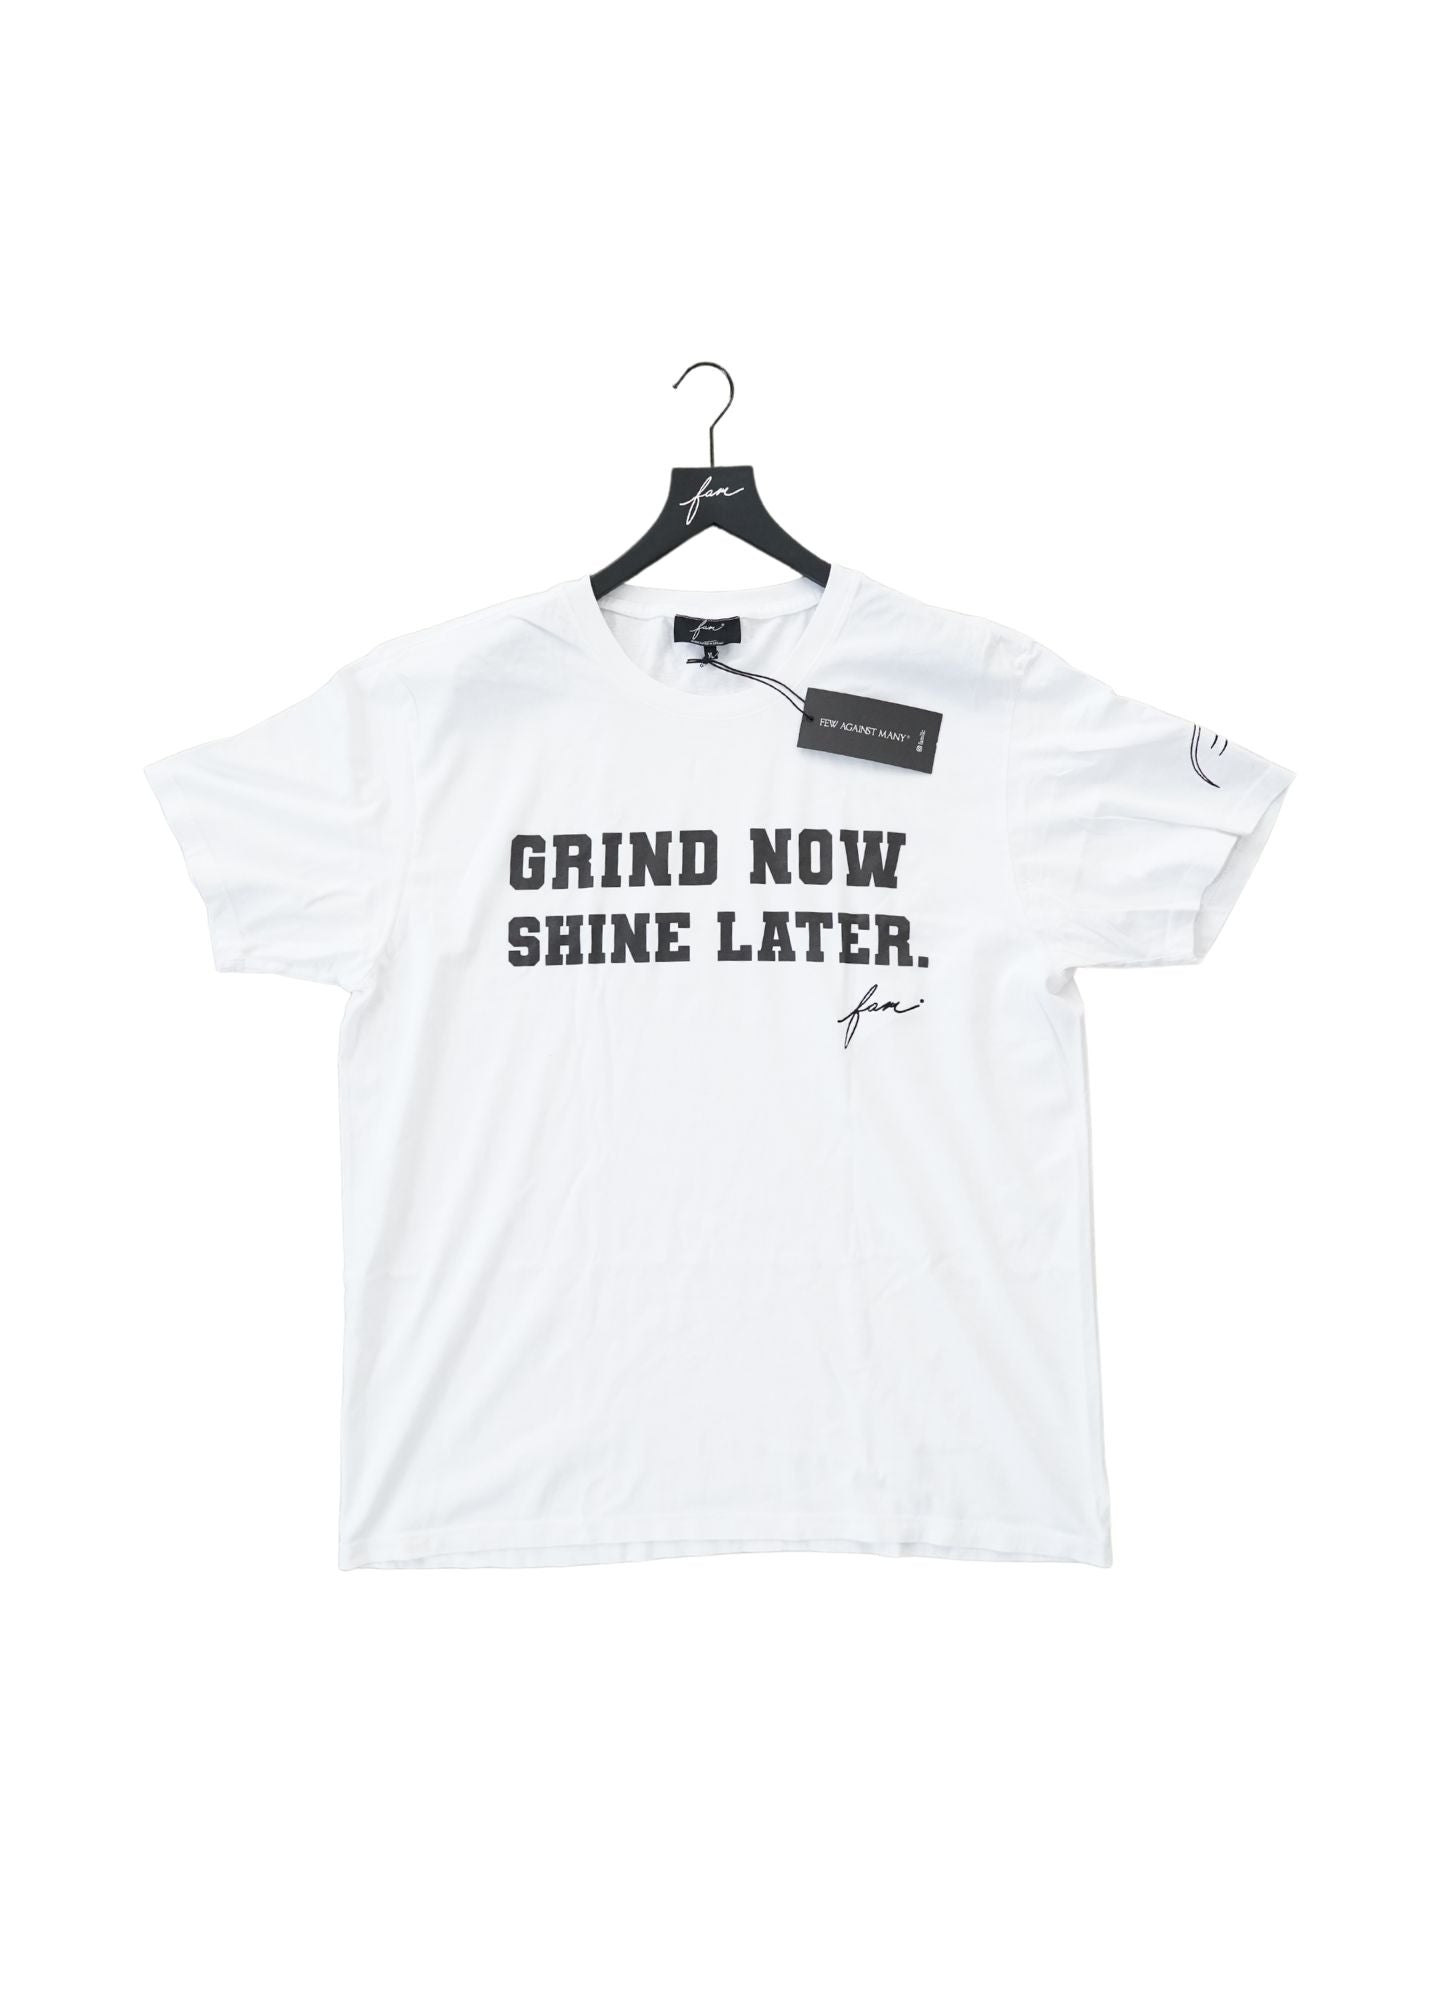 Fam - Grind Now Shine Later - Embroidered Graphic Tee